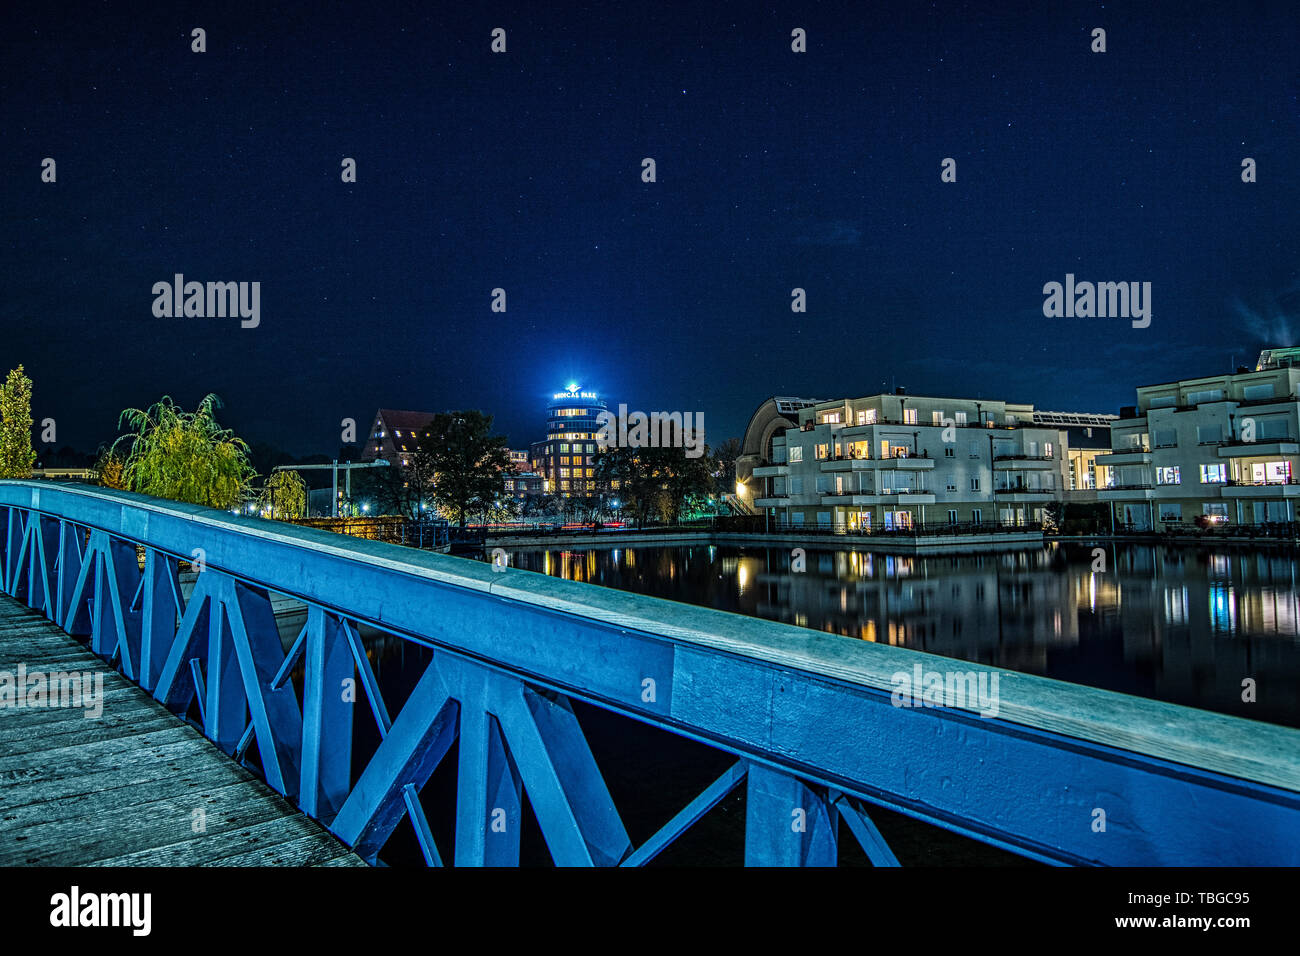 nightshot of the wooden blue bridge crossing the water of Humboldt harbour in Berlin Tegel with illuminated buildings in the background Stock Photo